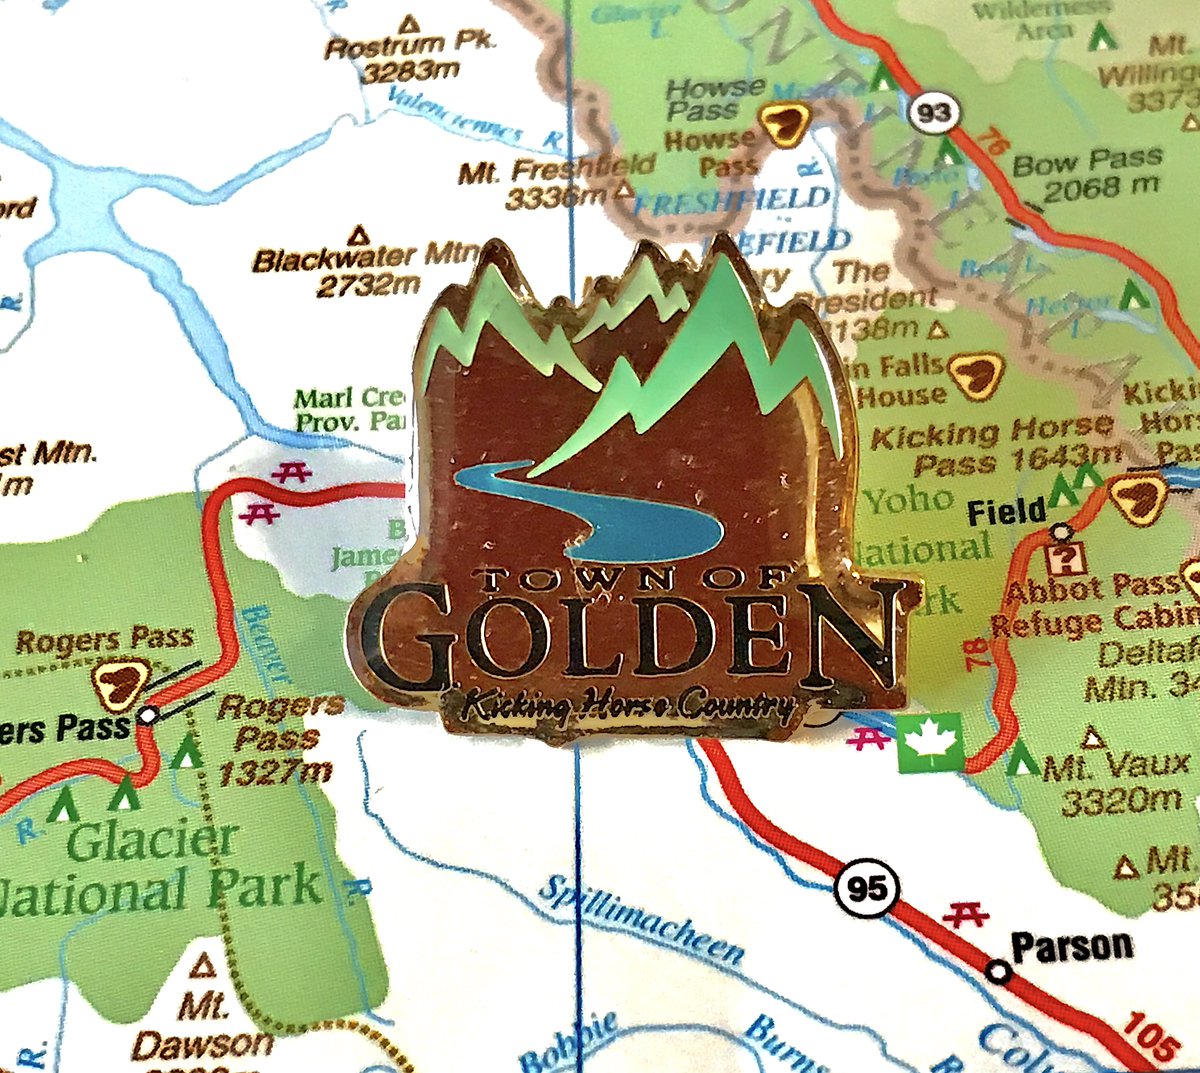 135. GOLDEN- Cooooooooorporate- But not bad, if generic B.C. with "river and mountains!" theme- Too many words, fun design with mountains sticking out